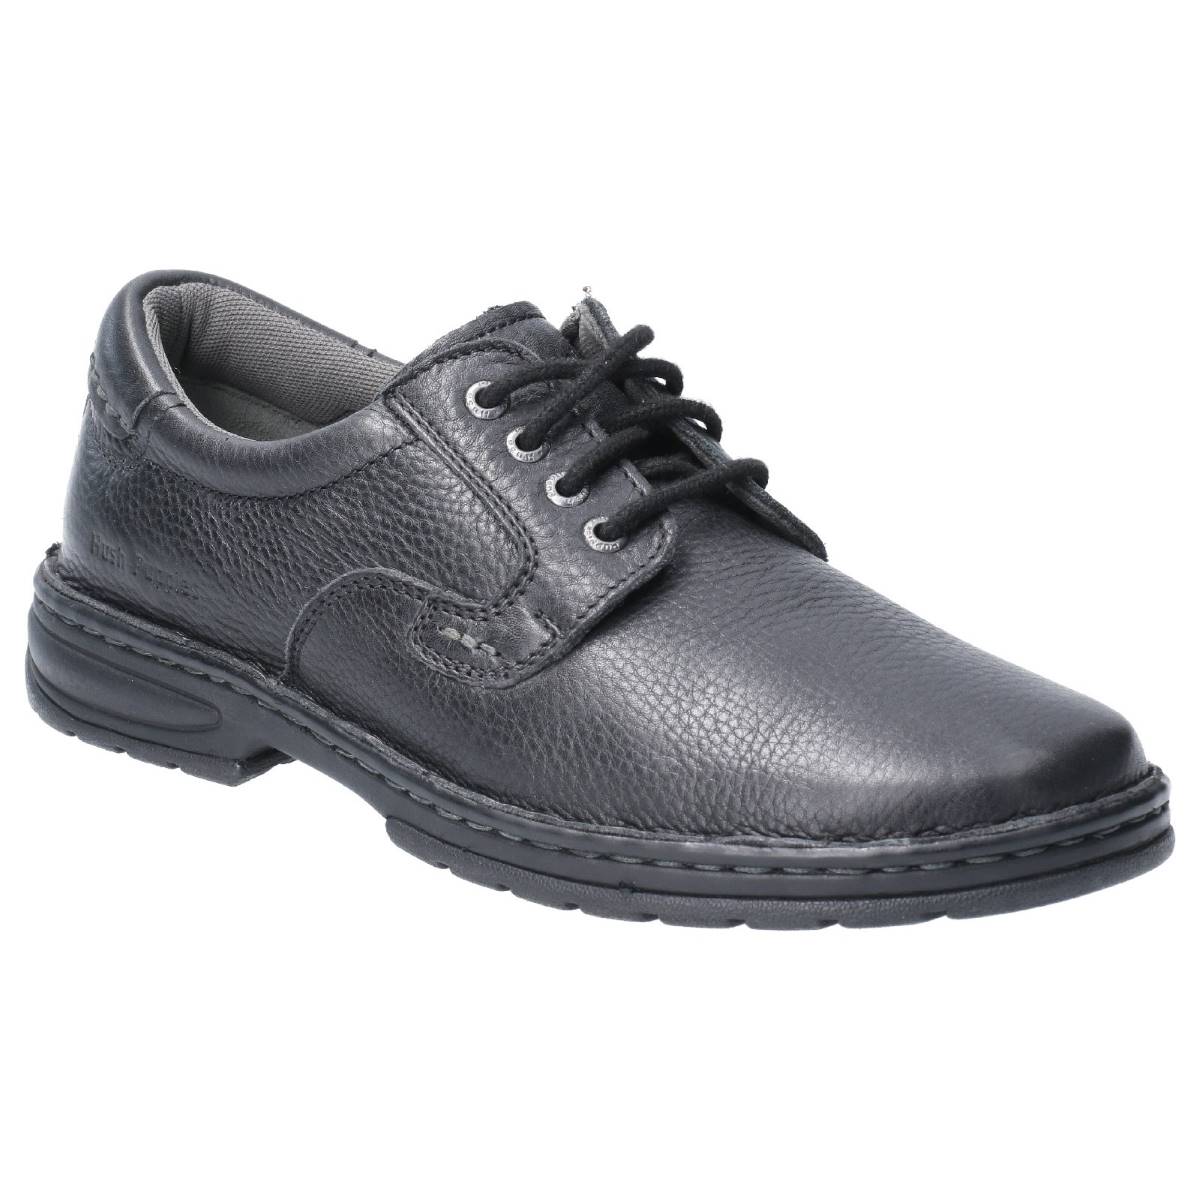 Hush Puppies Outlaw Ii Black Mens comfort shoes HPM2000-61-1 in a Plain Leather in Size 11